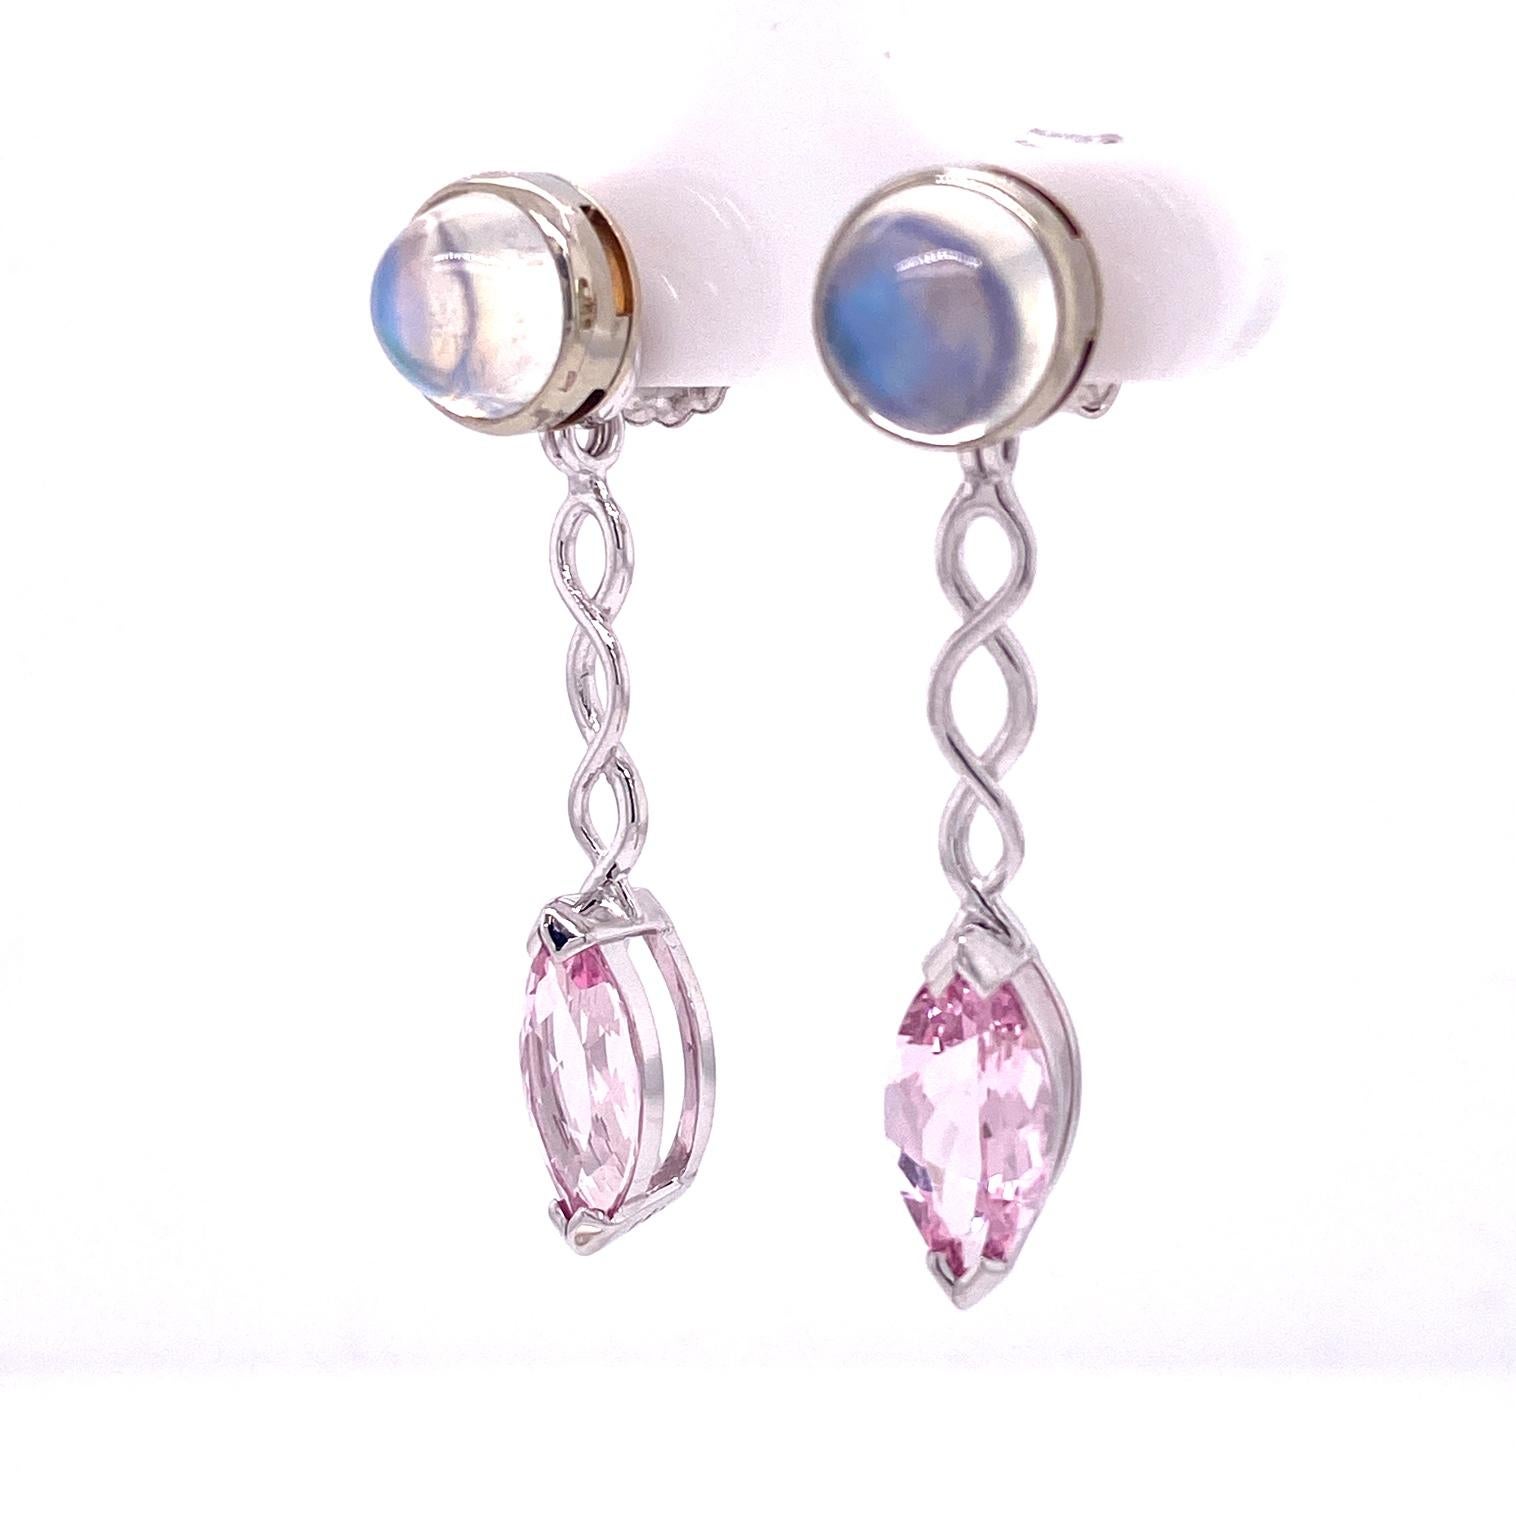 A pair of 18k white gold stud earrings bezel set with round cabochon rainbow moonstones, 4.59 total carat weight, and a pair of 18k white gold jackets set with 12mm x 6mm marquise morganite jackets, 3.02 total carat weight. These earrings were made